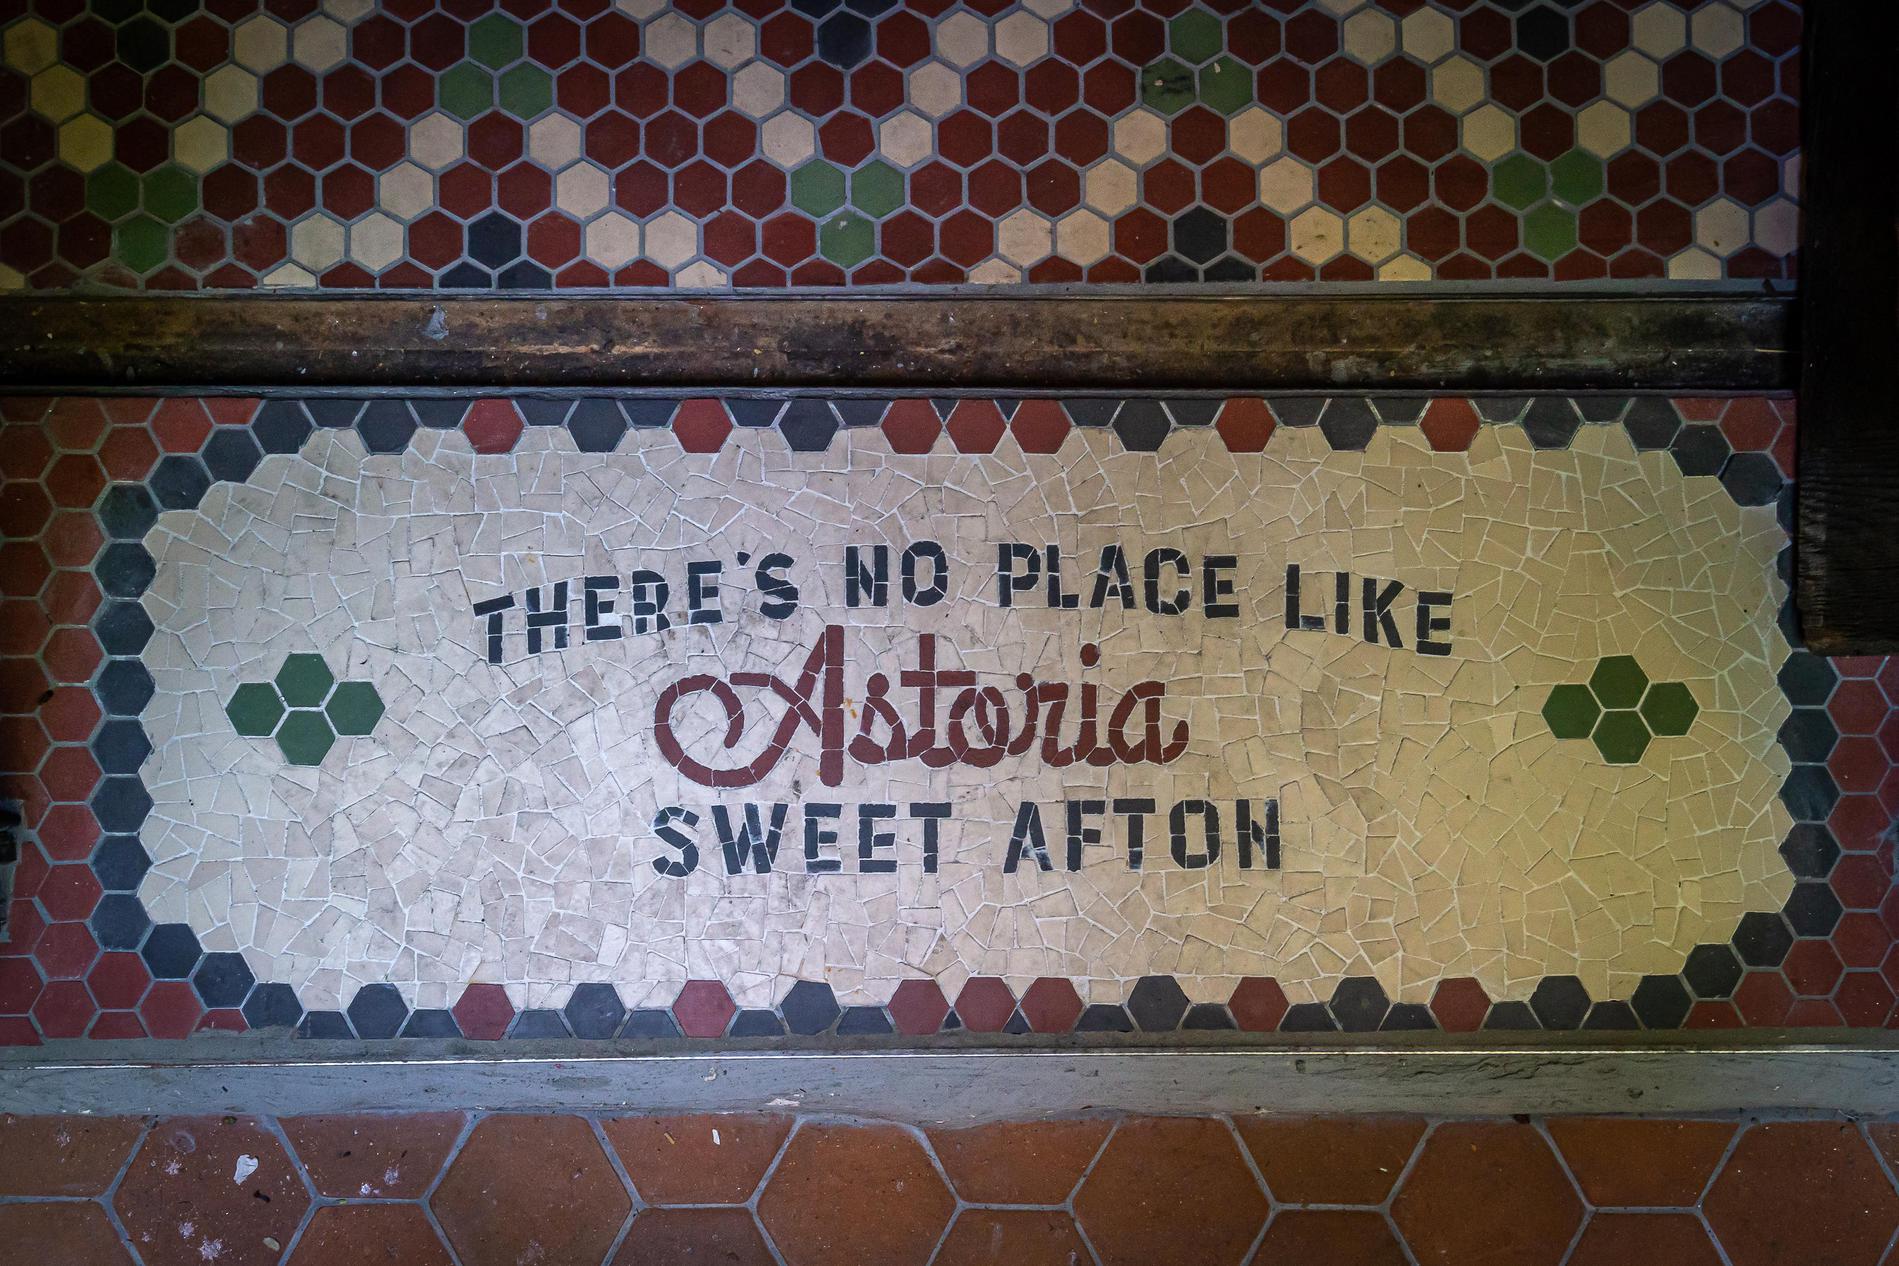 There's no place like Sweet Afton.